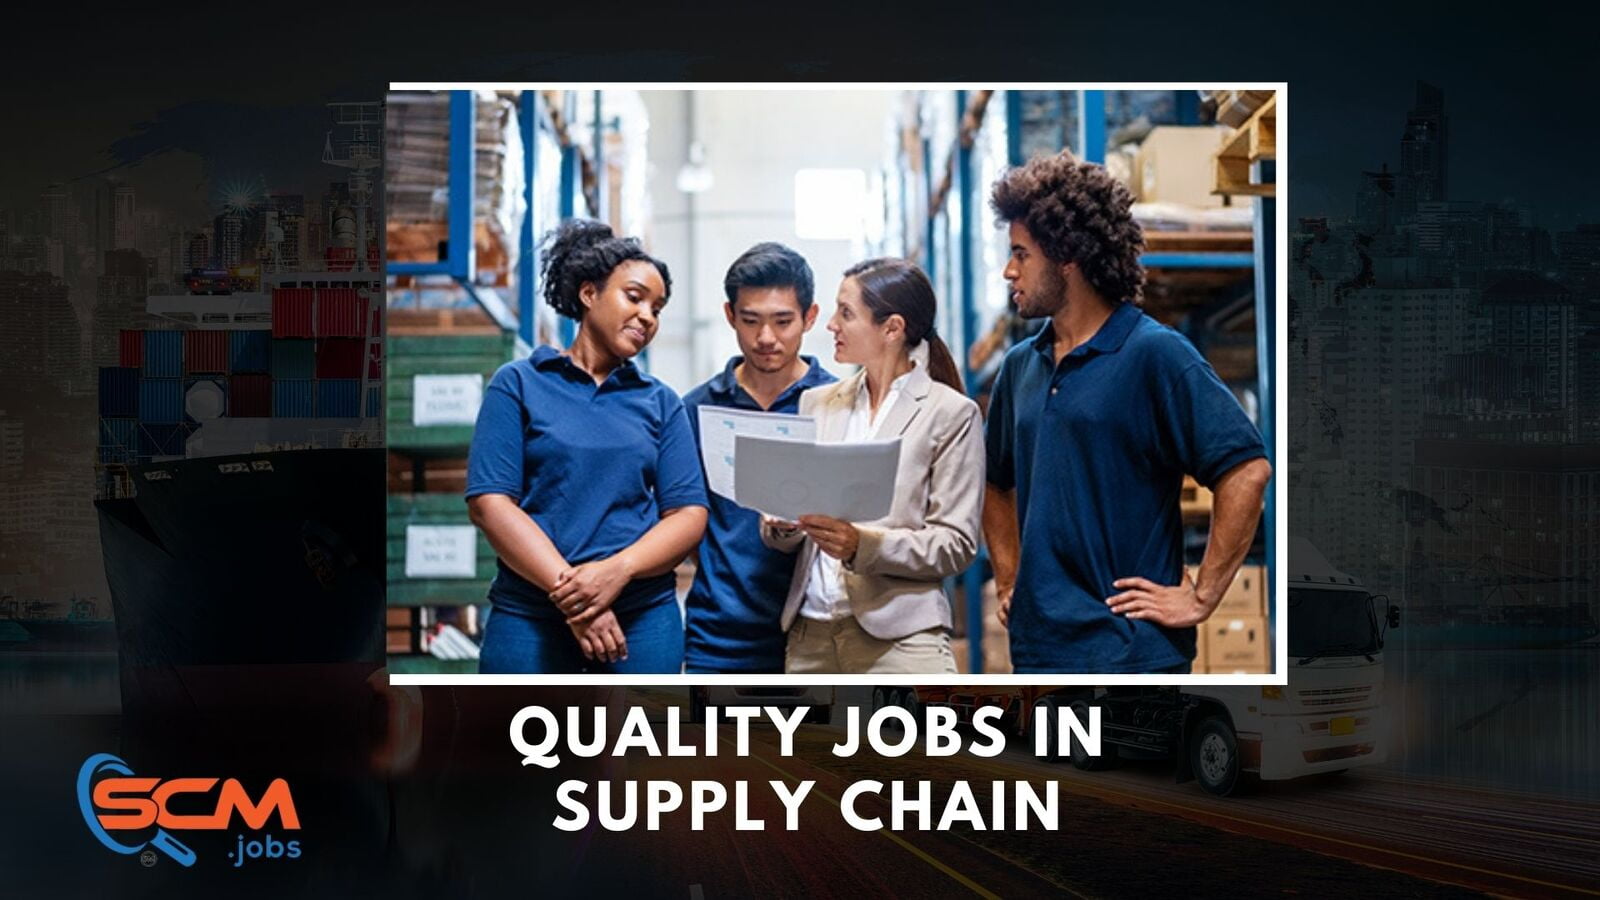 Quality Jobs in Supply Chain: Building a Bright Future